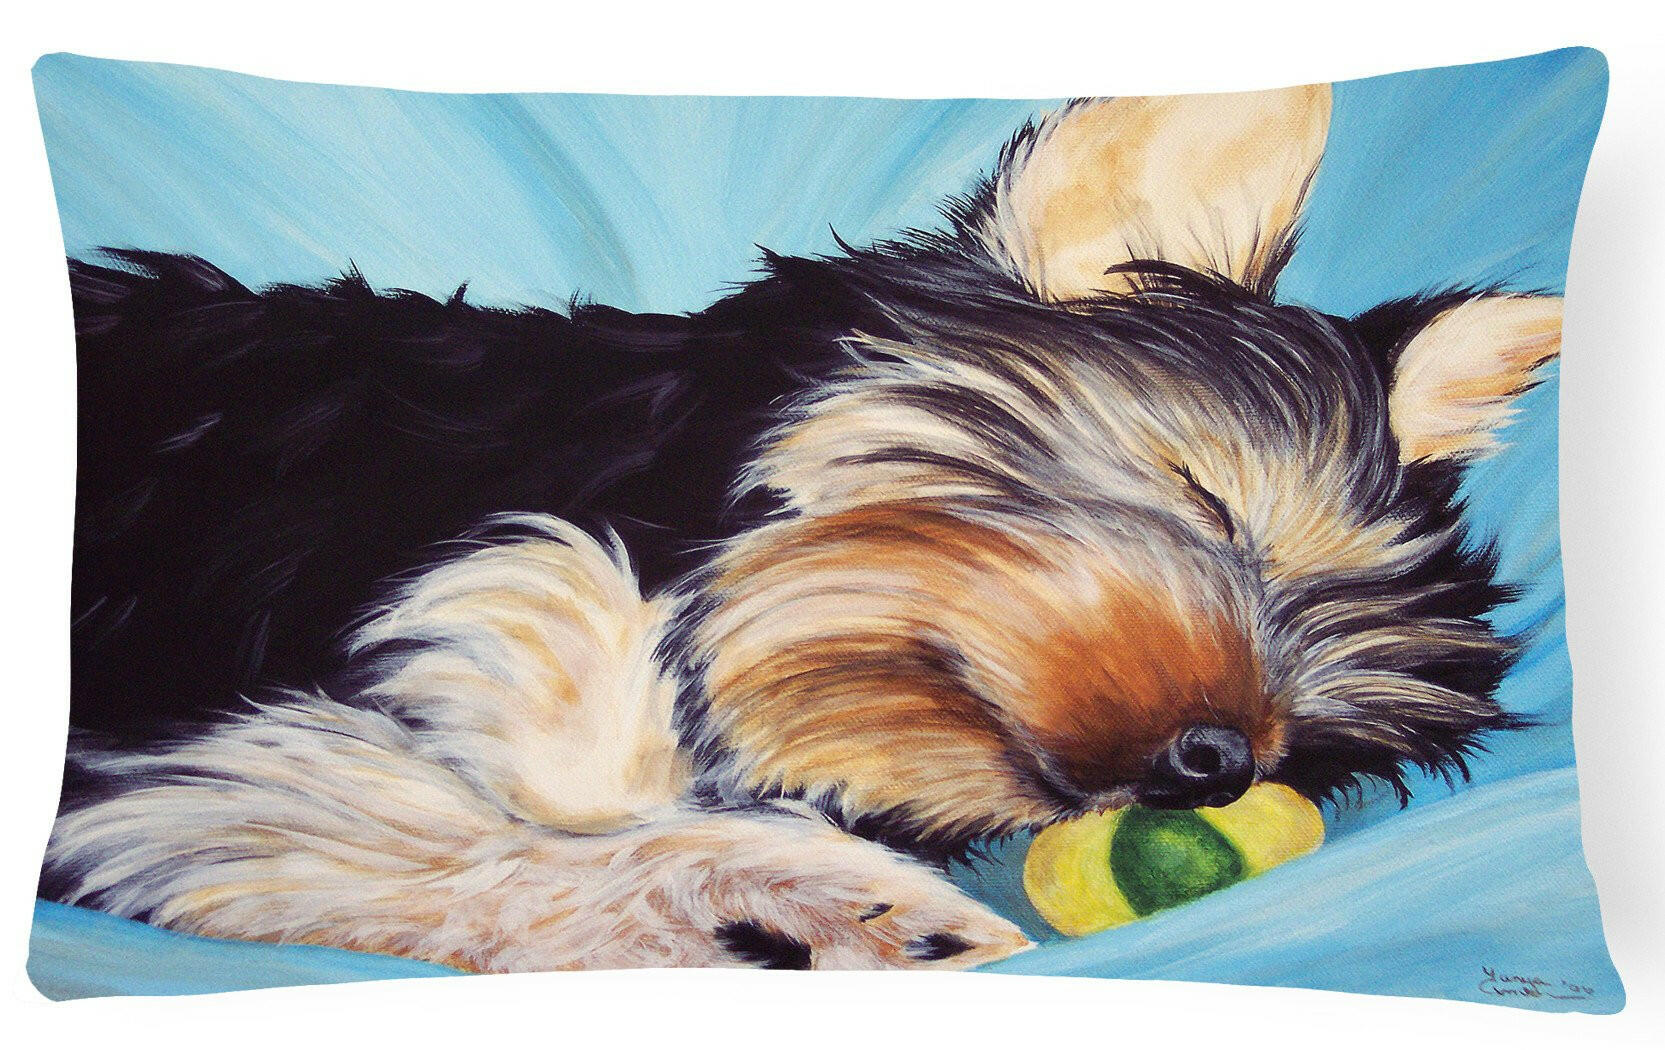 Naptime Yorkie Yorkshire Terrier Fabric Decorative Pillow AMB1075PW1216 by Caroline's Treasures